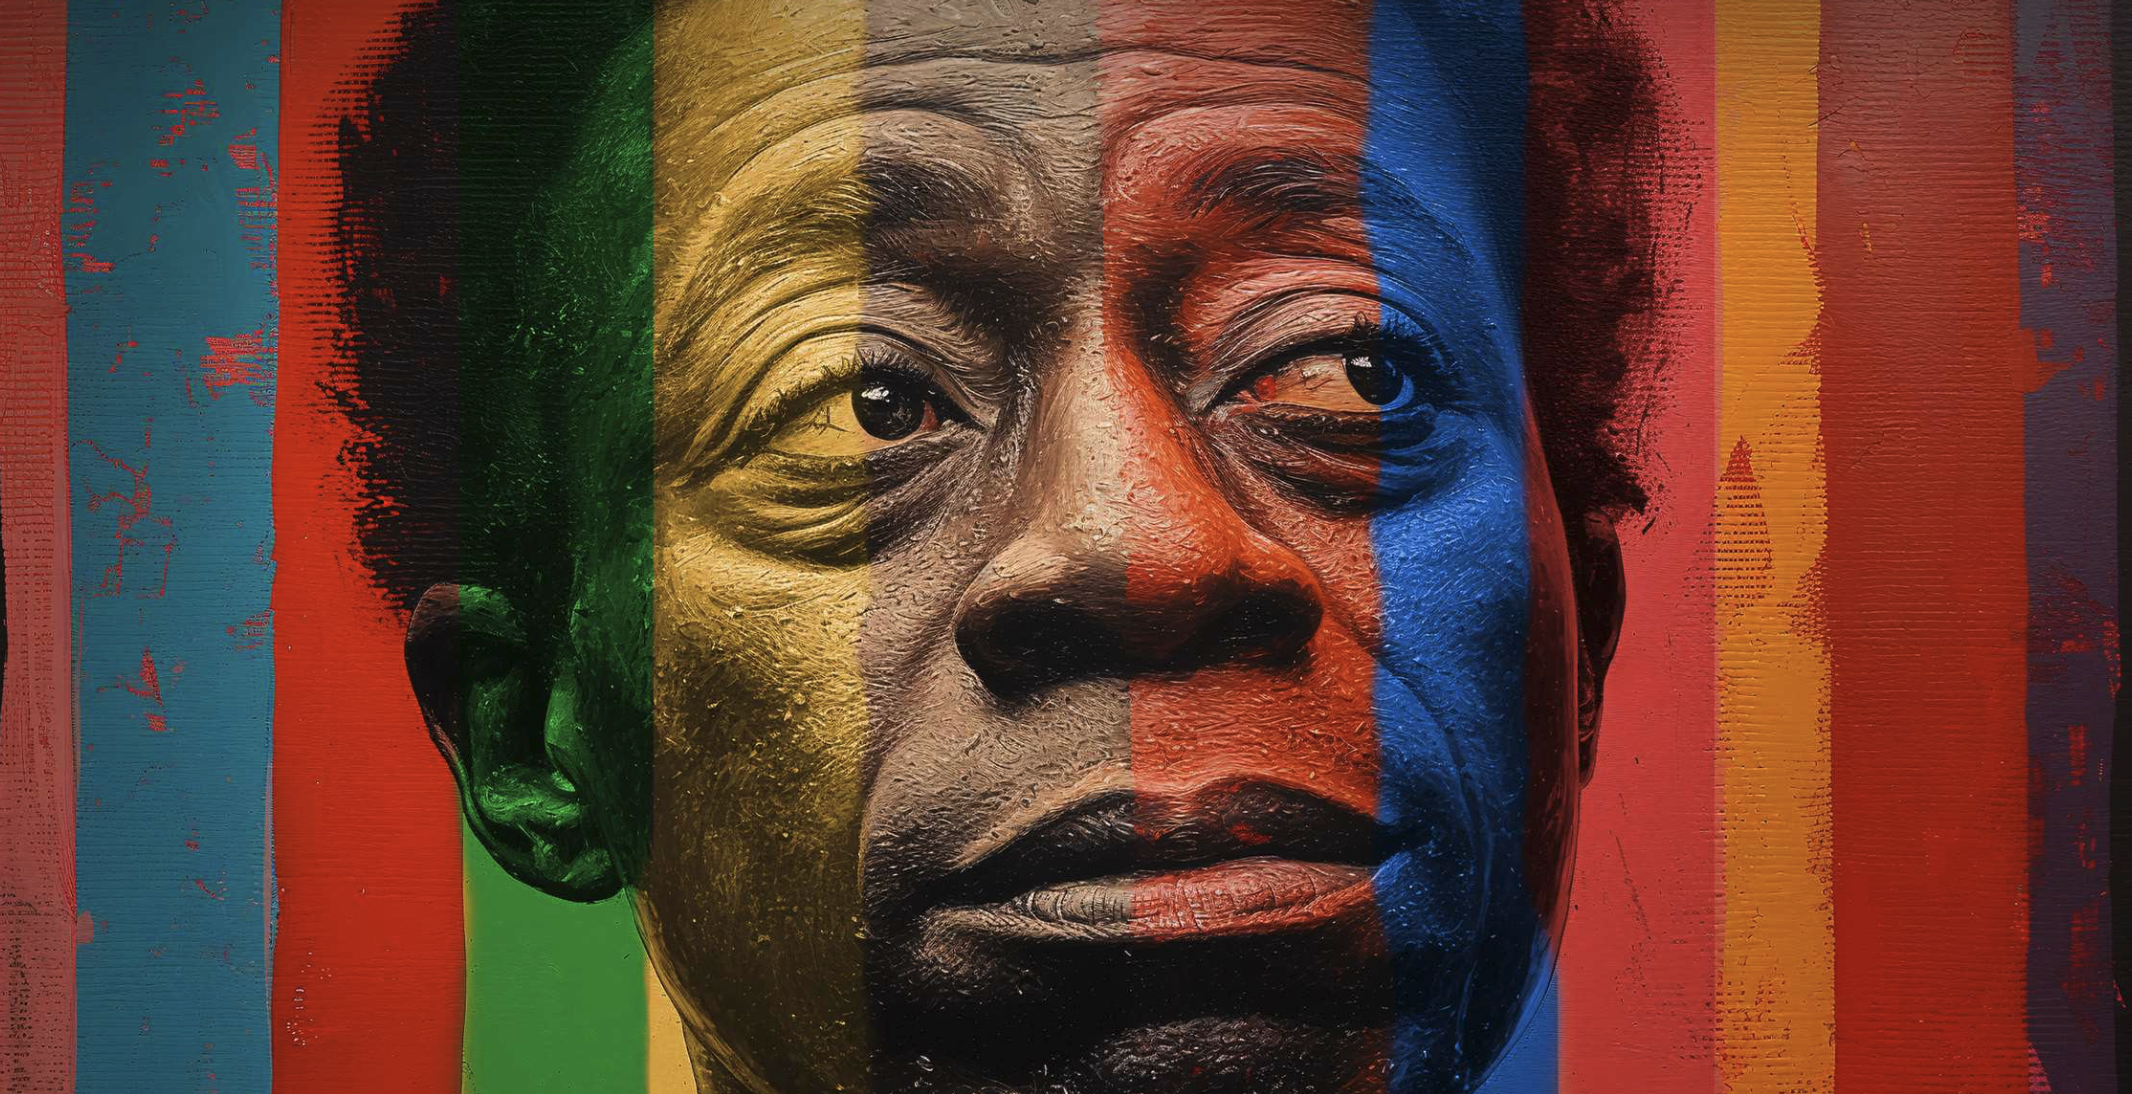 An Italian podcast celebrates author and activist James Baldwin during Pride month